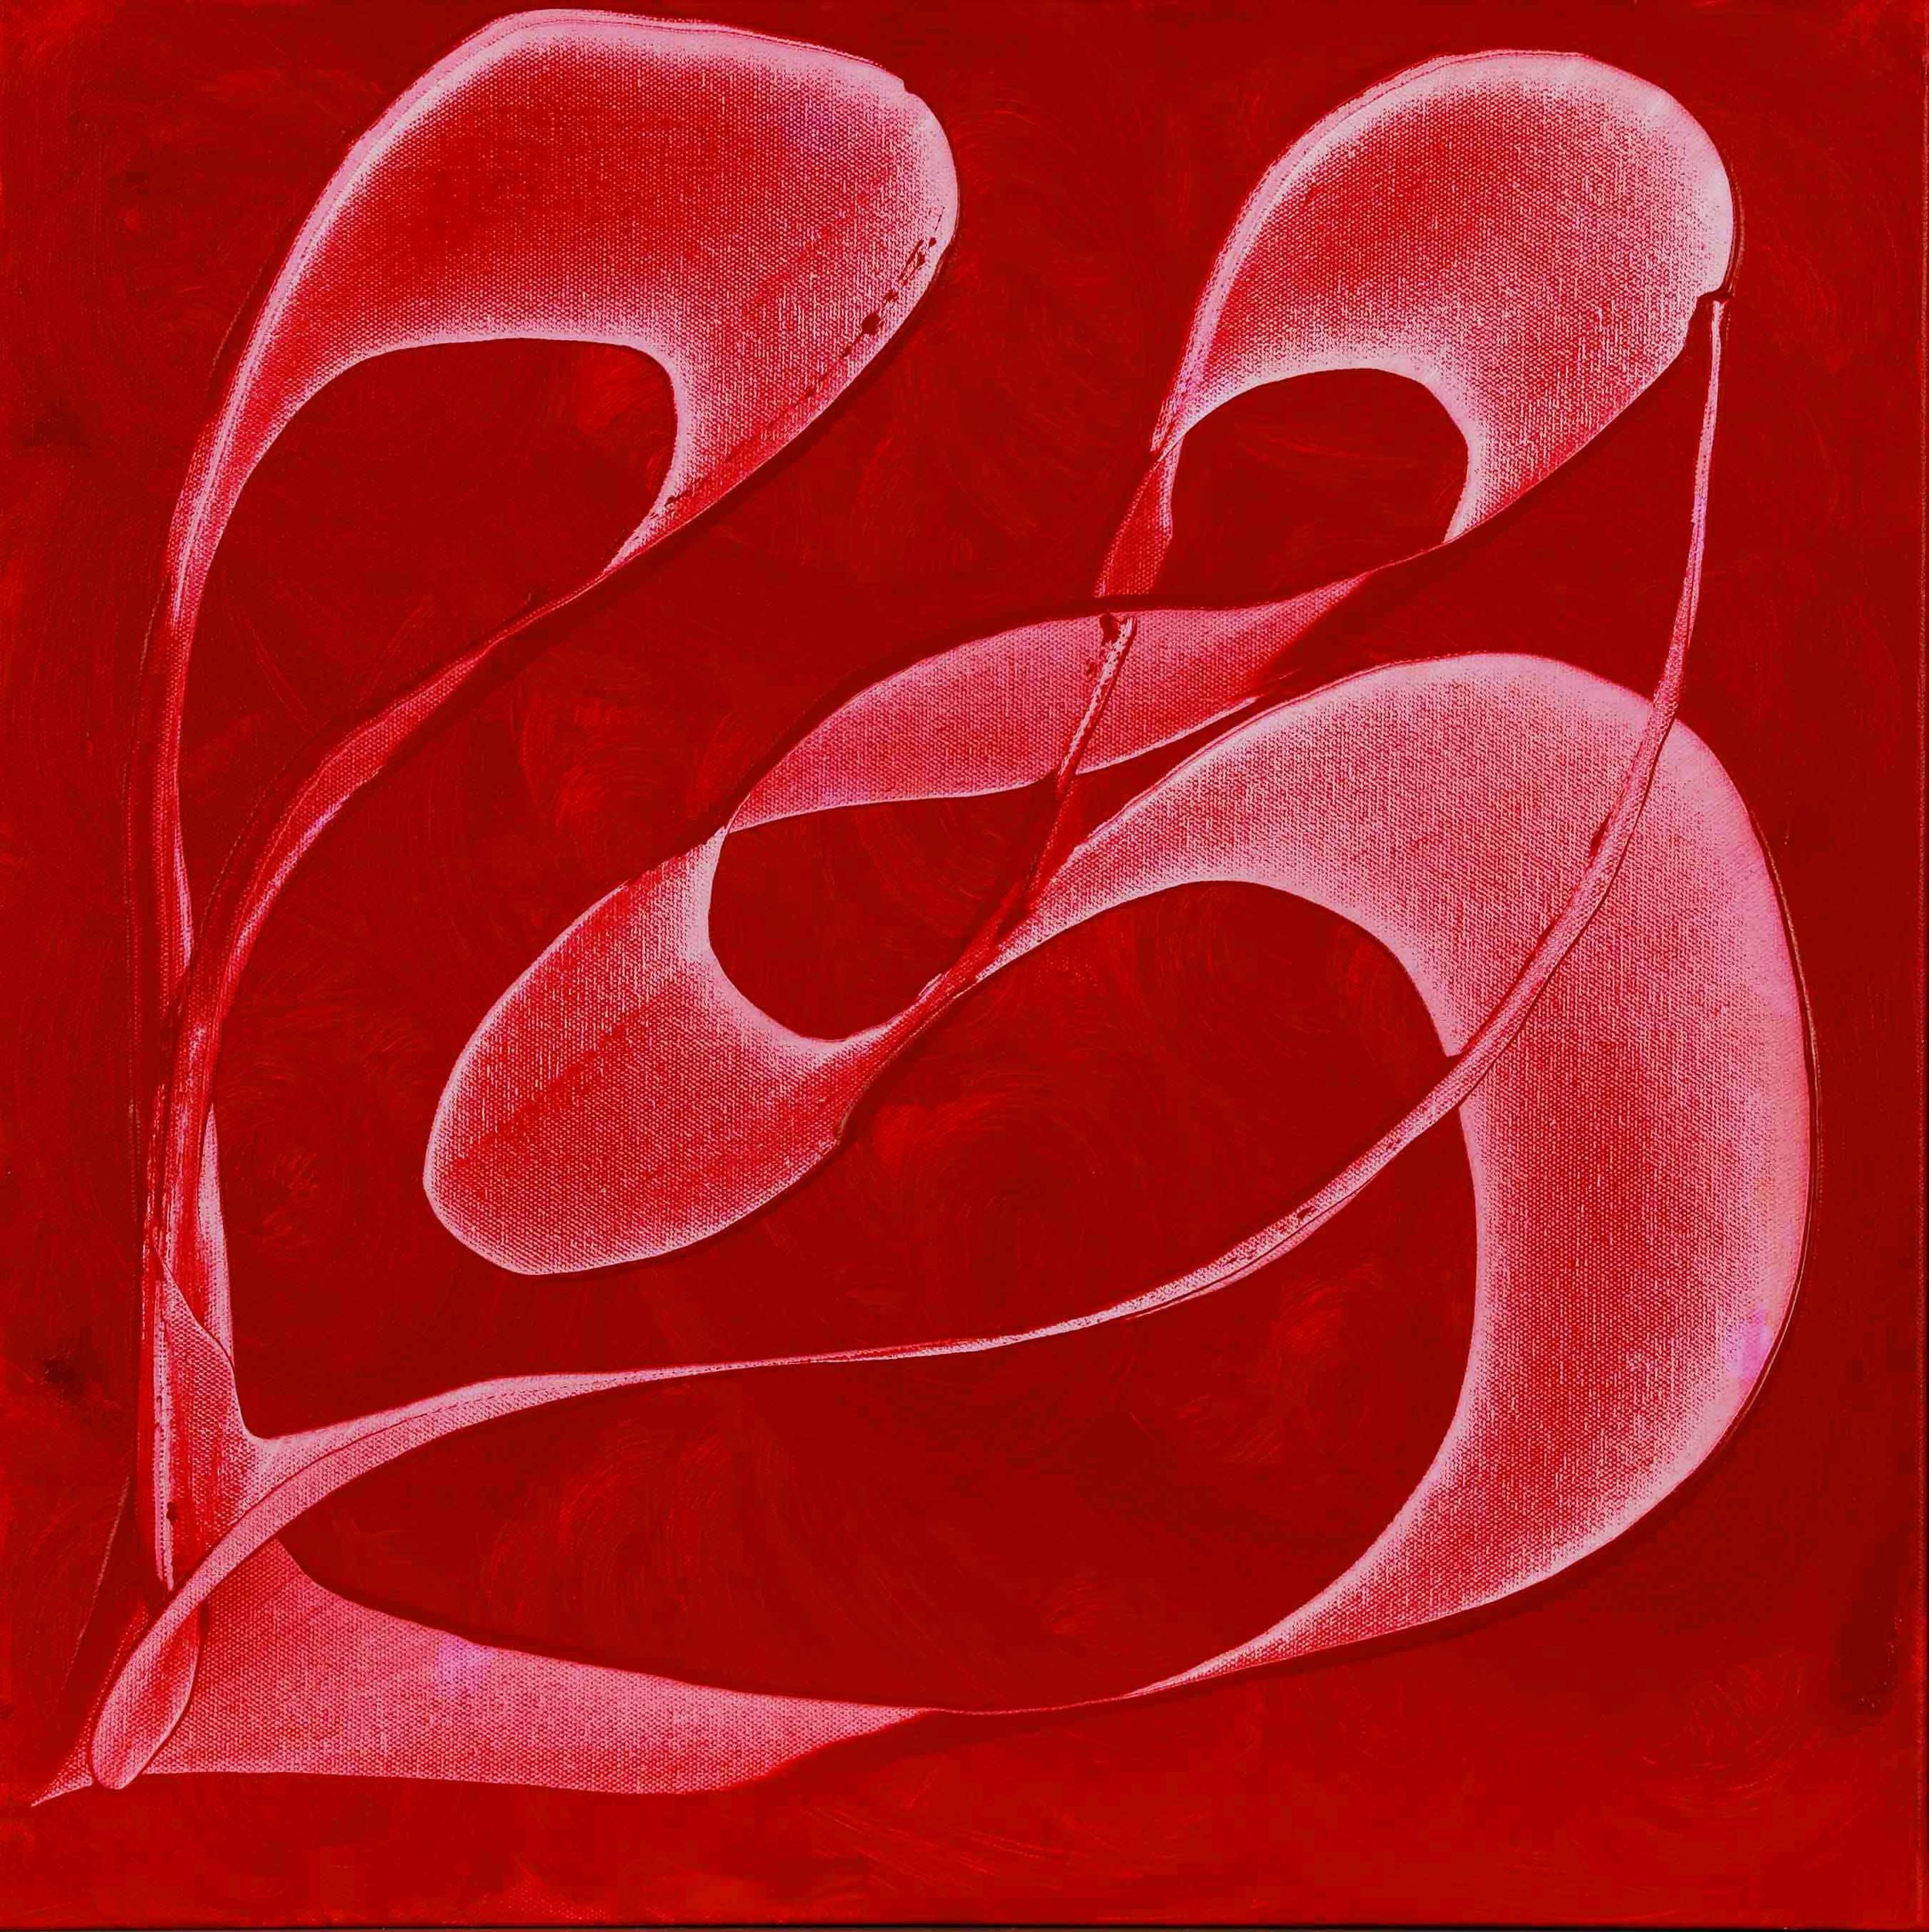 Love Forever - 20"H x 20"W x 2.5"D